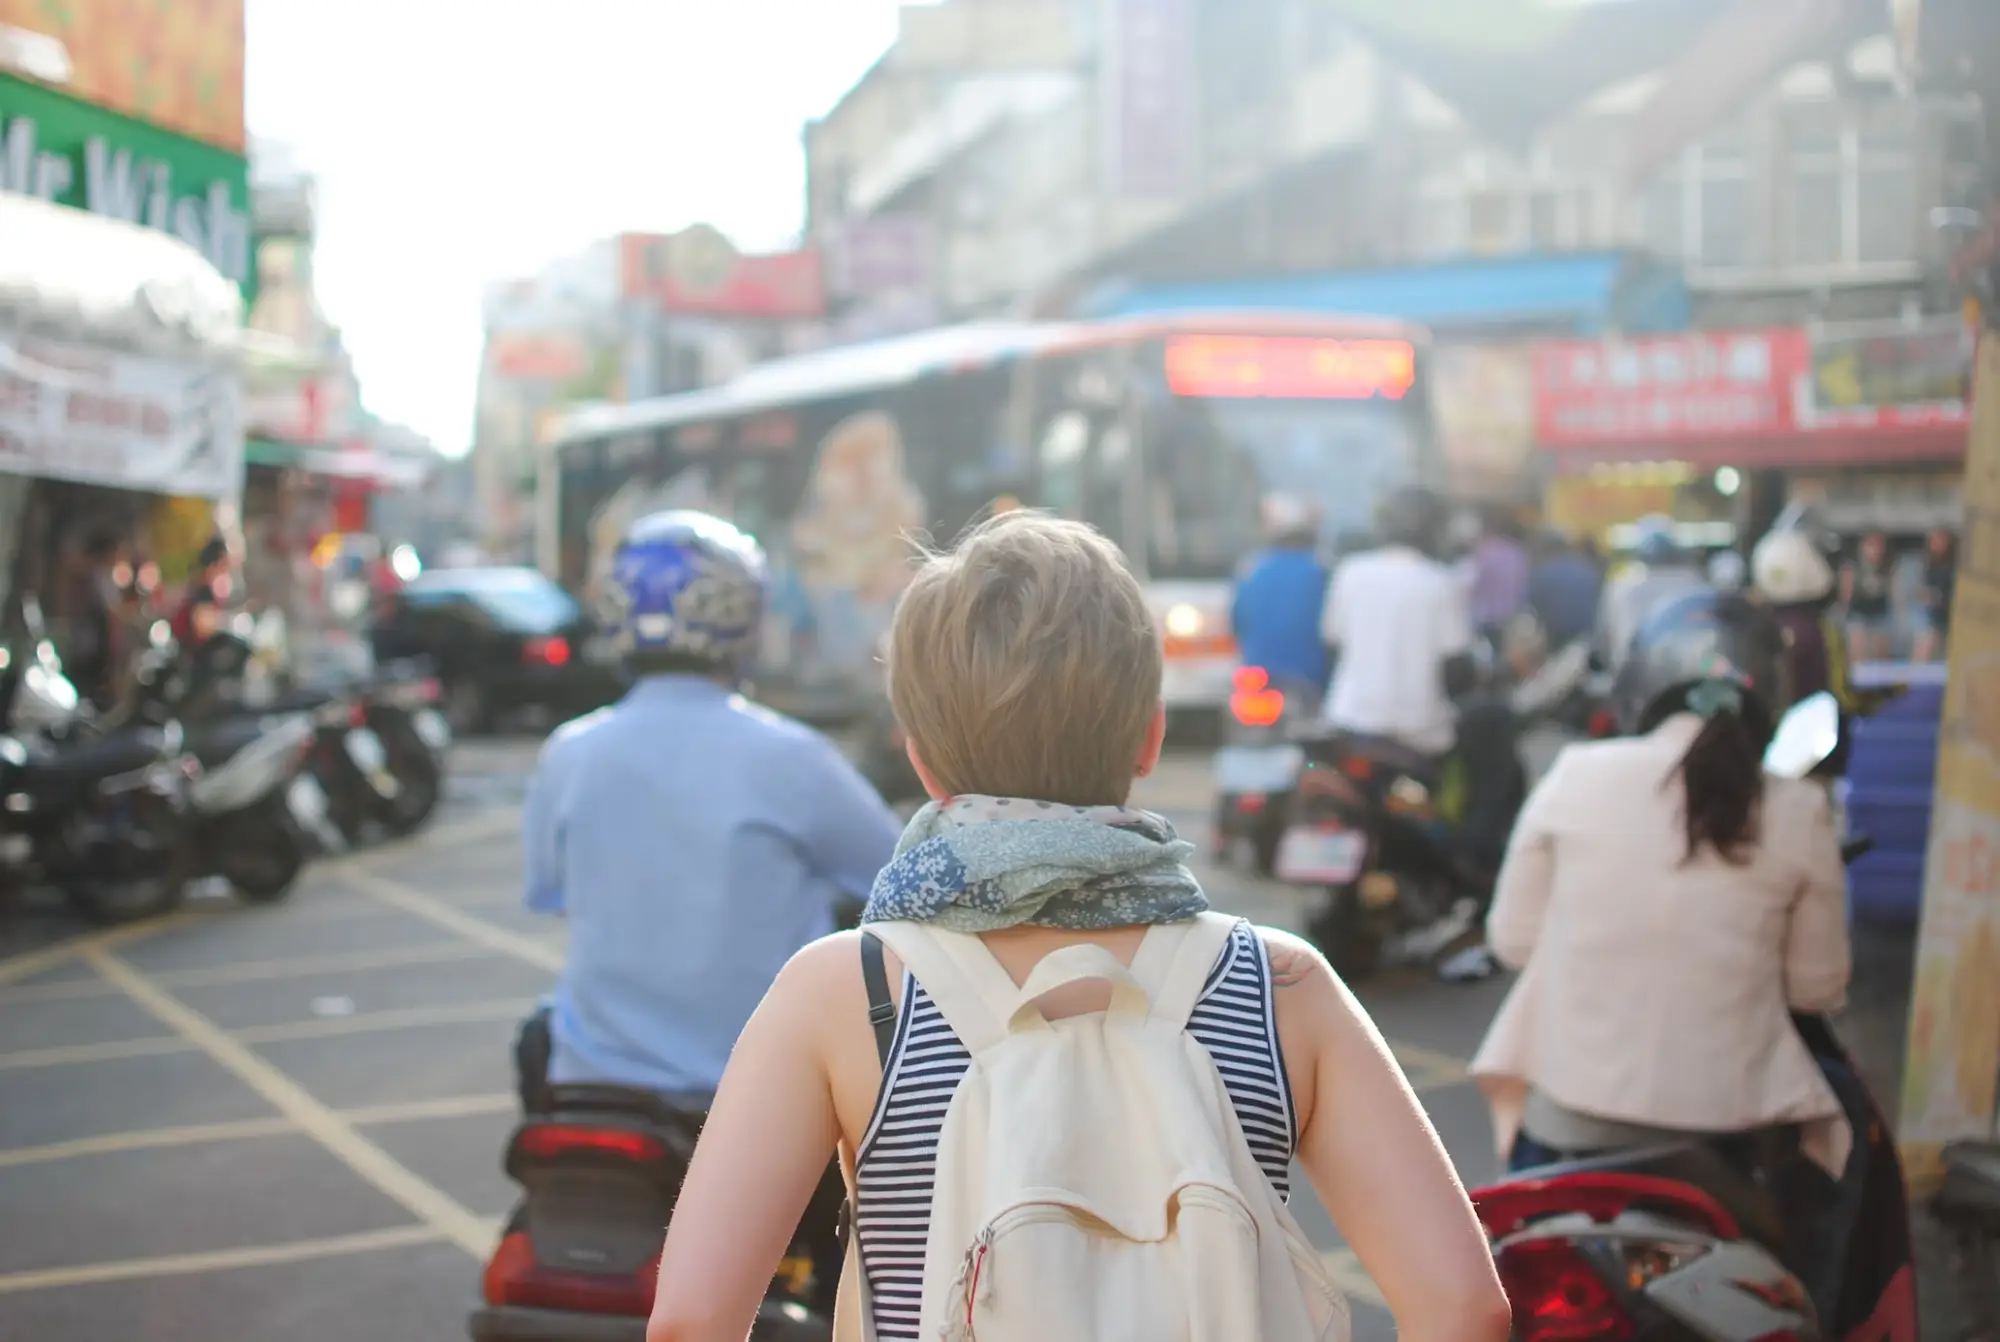 How can I Travel India safely? Here are the latest guidelines for international travellers